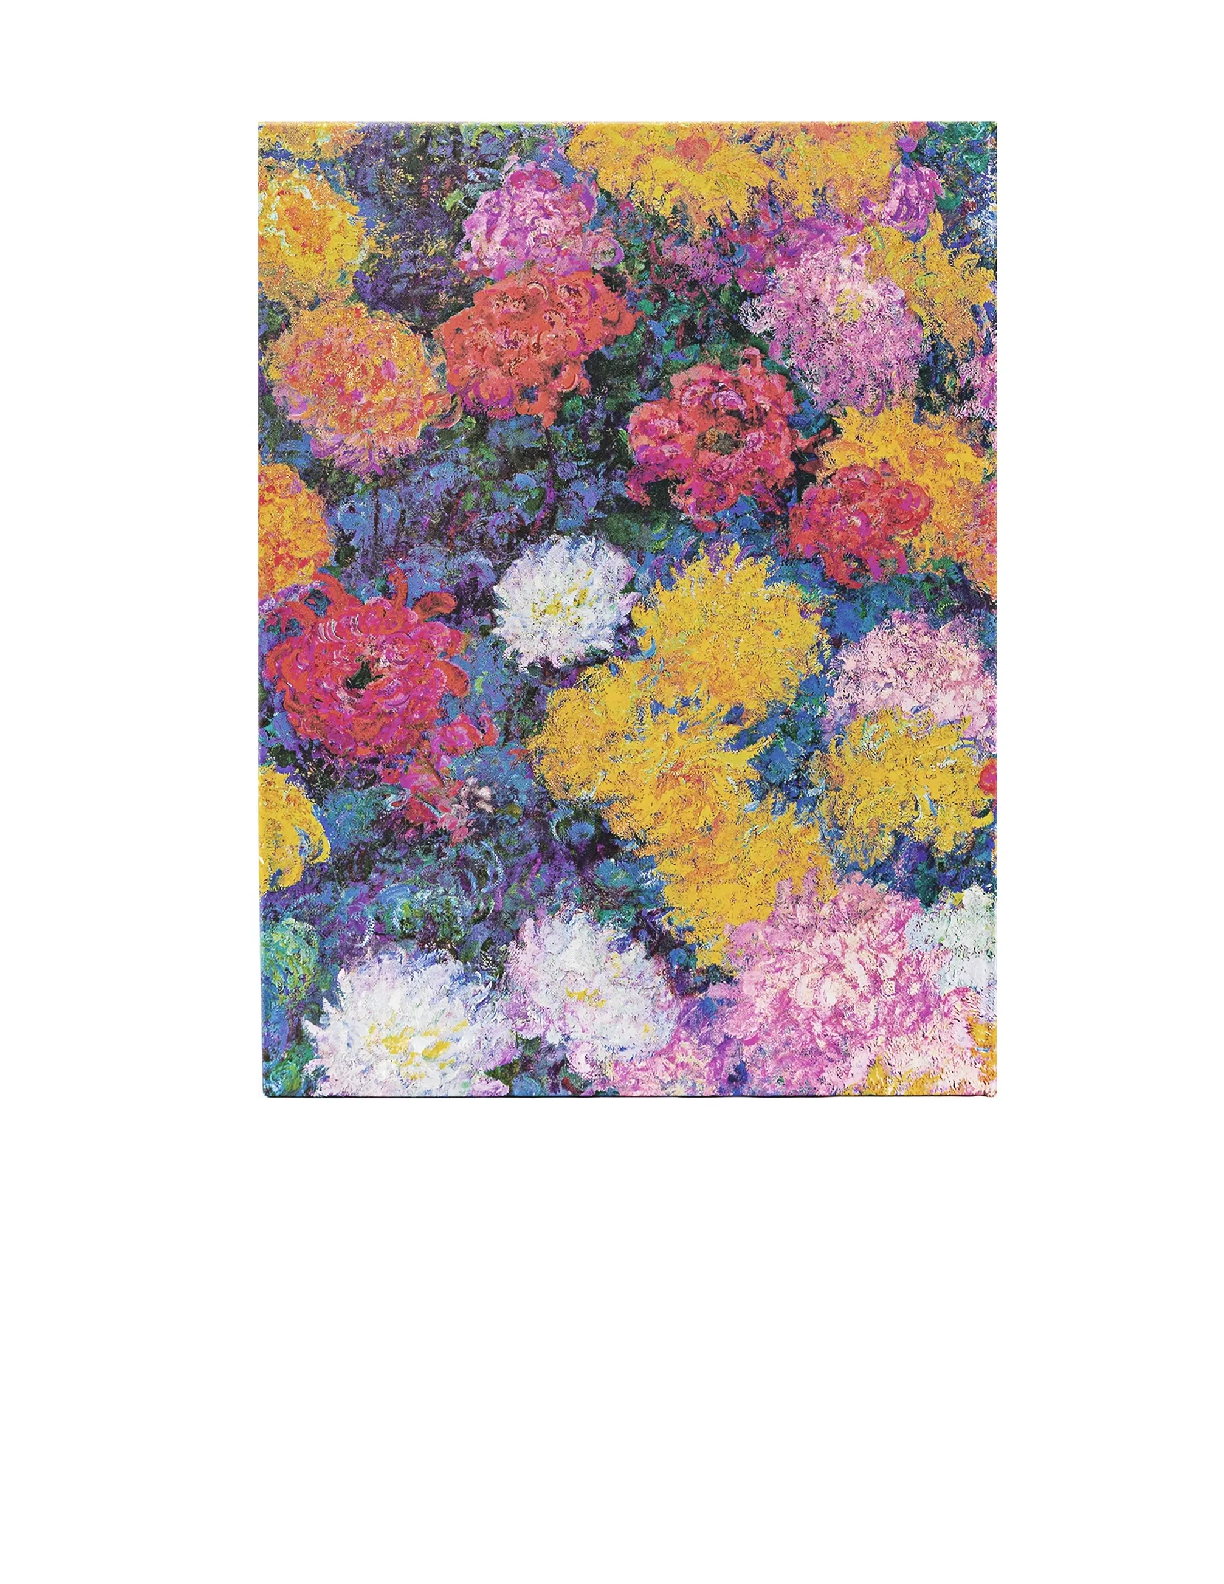 Monet's Chrysanthemums, Hardcover Journals, Ultra, Lined, Elastic Band, 144 Pg, 120 GSM